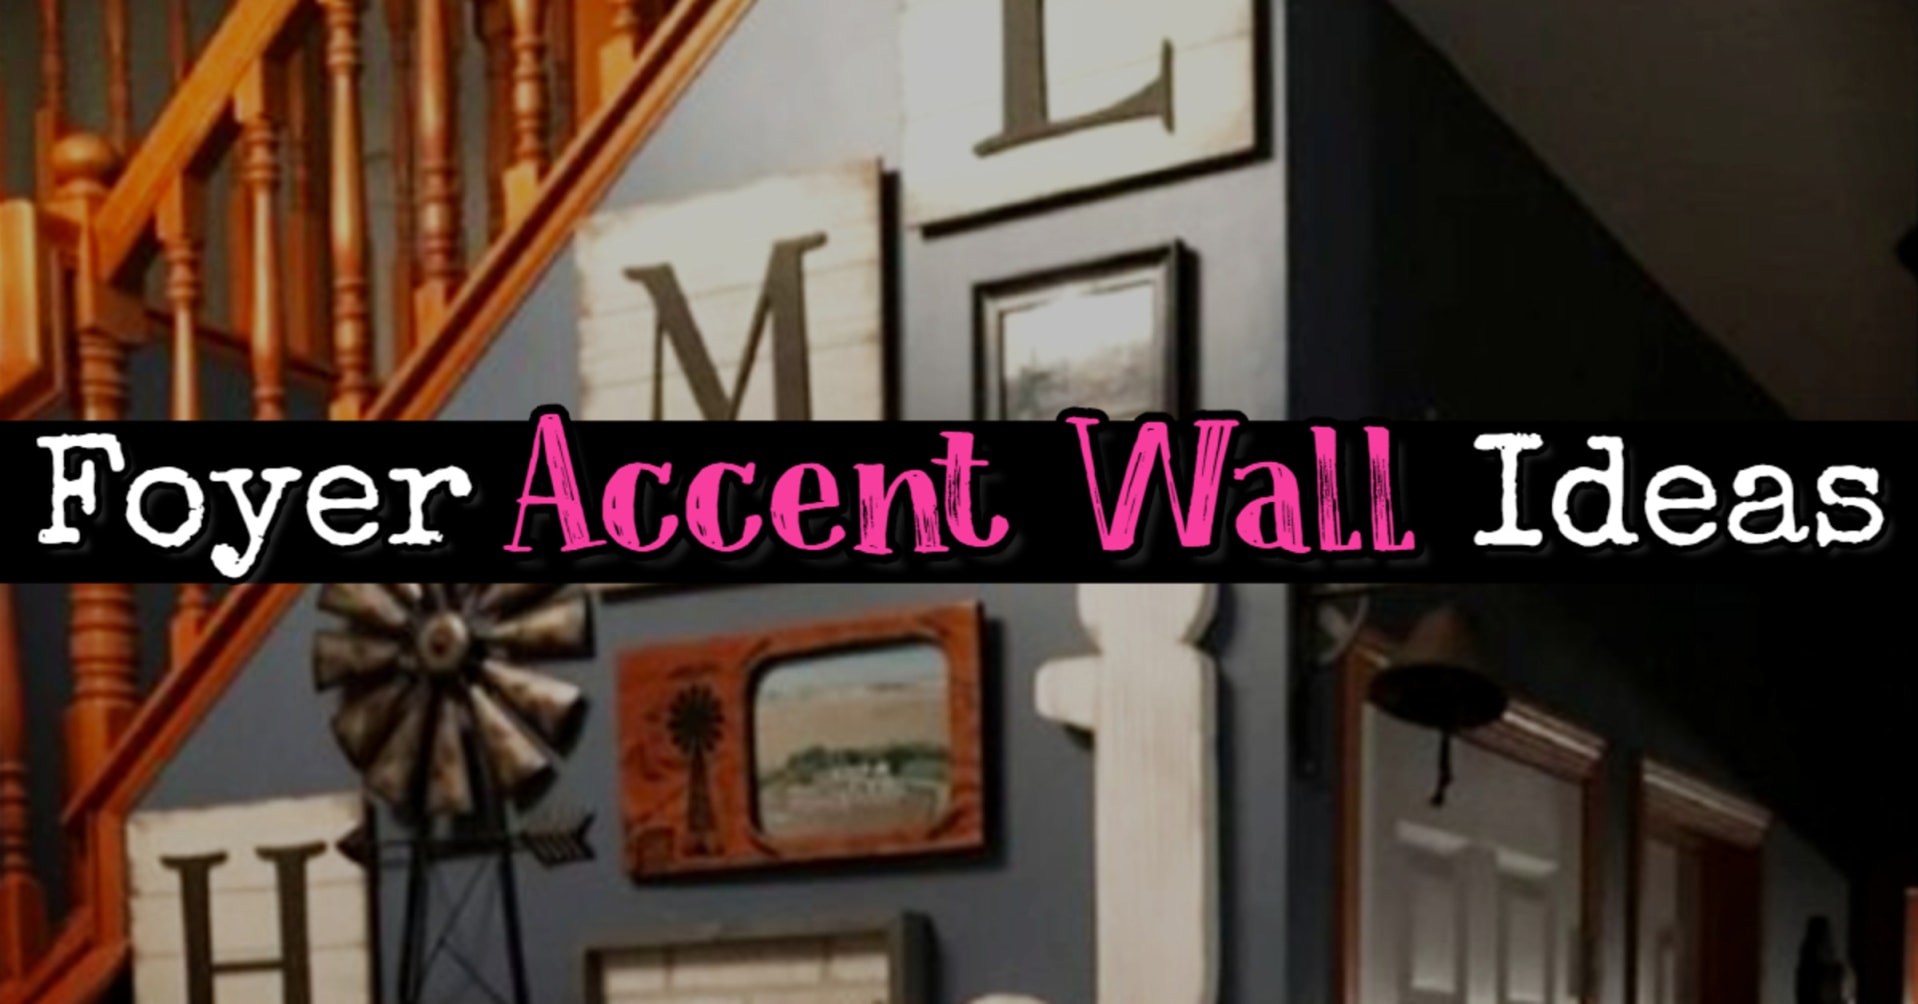 Foyer Accent Wall Ideas Easy Diy Decorating Ideas For Your Entry Wall